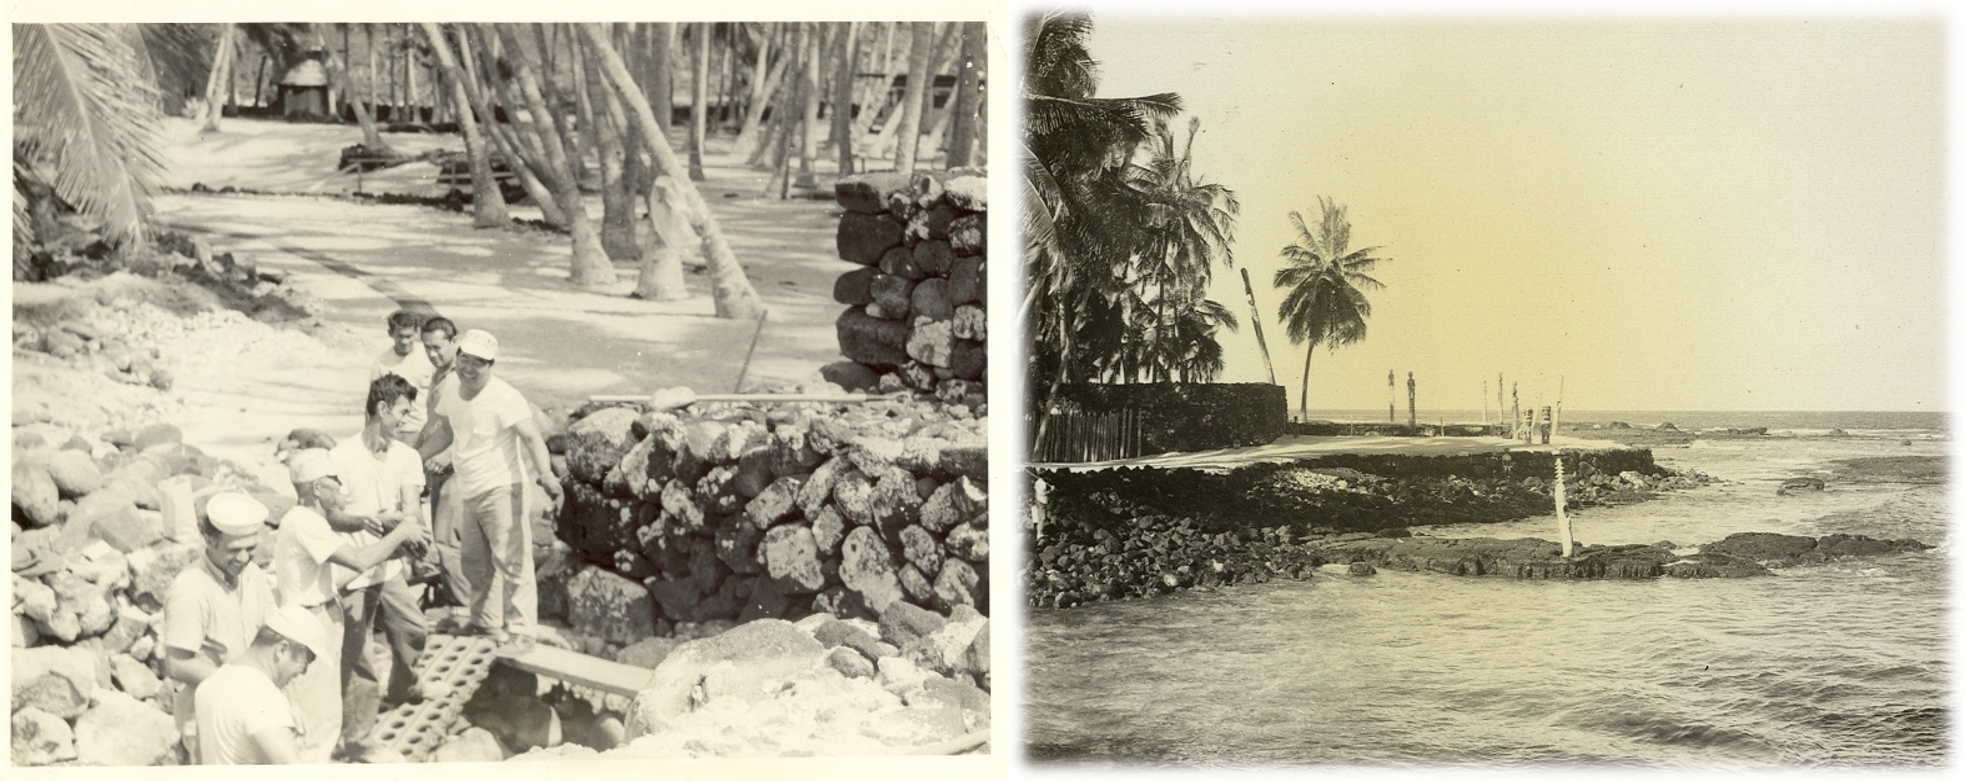 Two Photos: 1) Workers perform an archaeological excavation of the Hale o Keawe platform 2) Historic photo of the restored Hale o Keawe platform